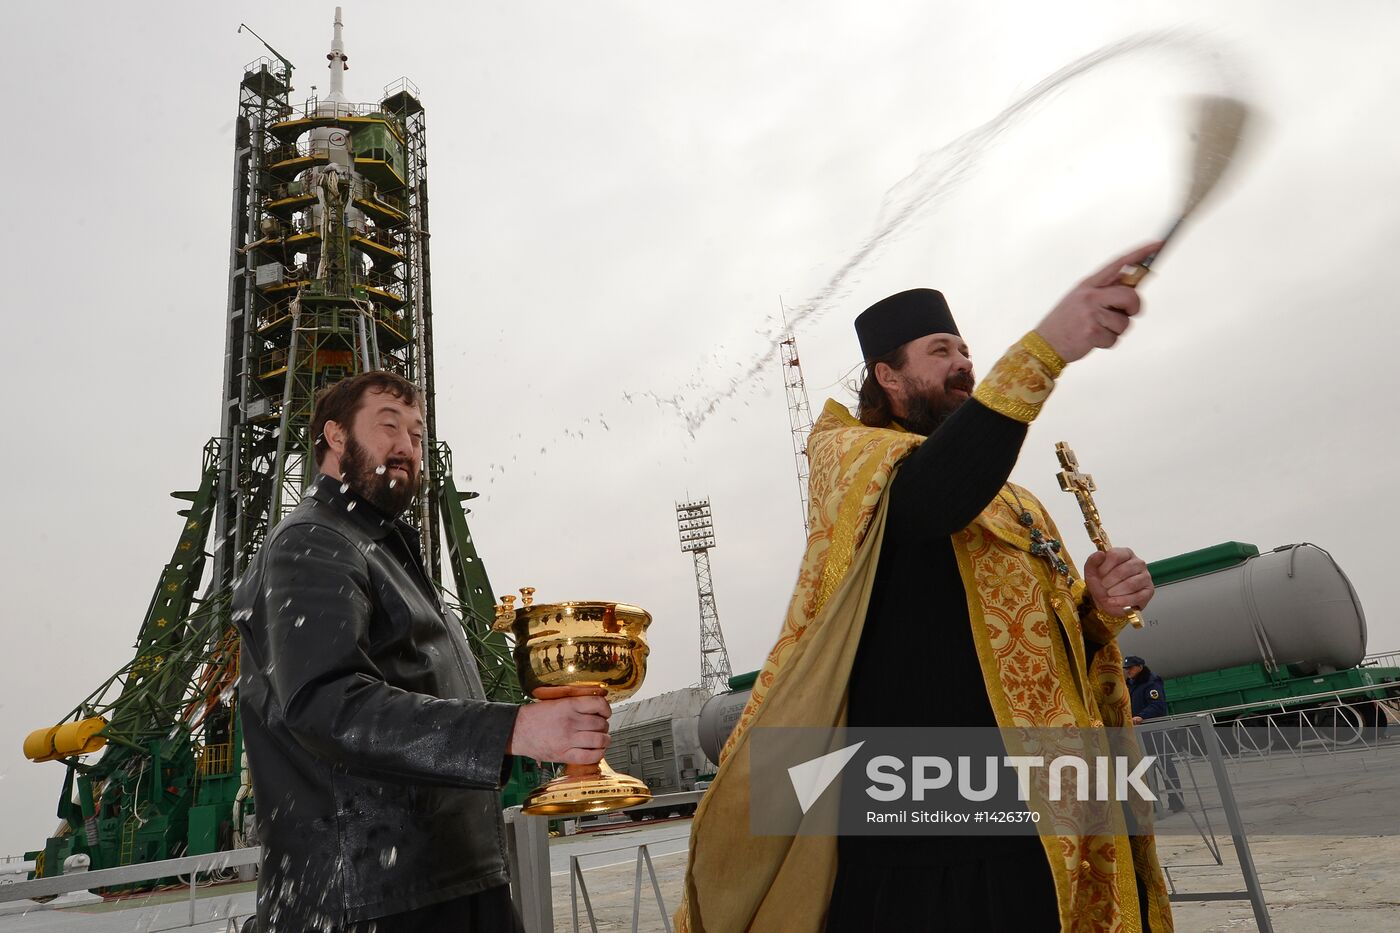 Blessing ritual performed for Soyuz TMA-08M spacecraft